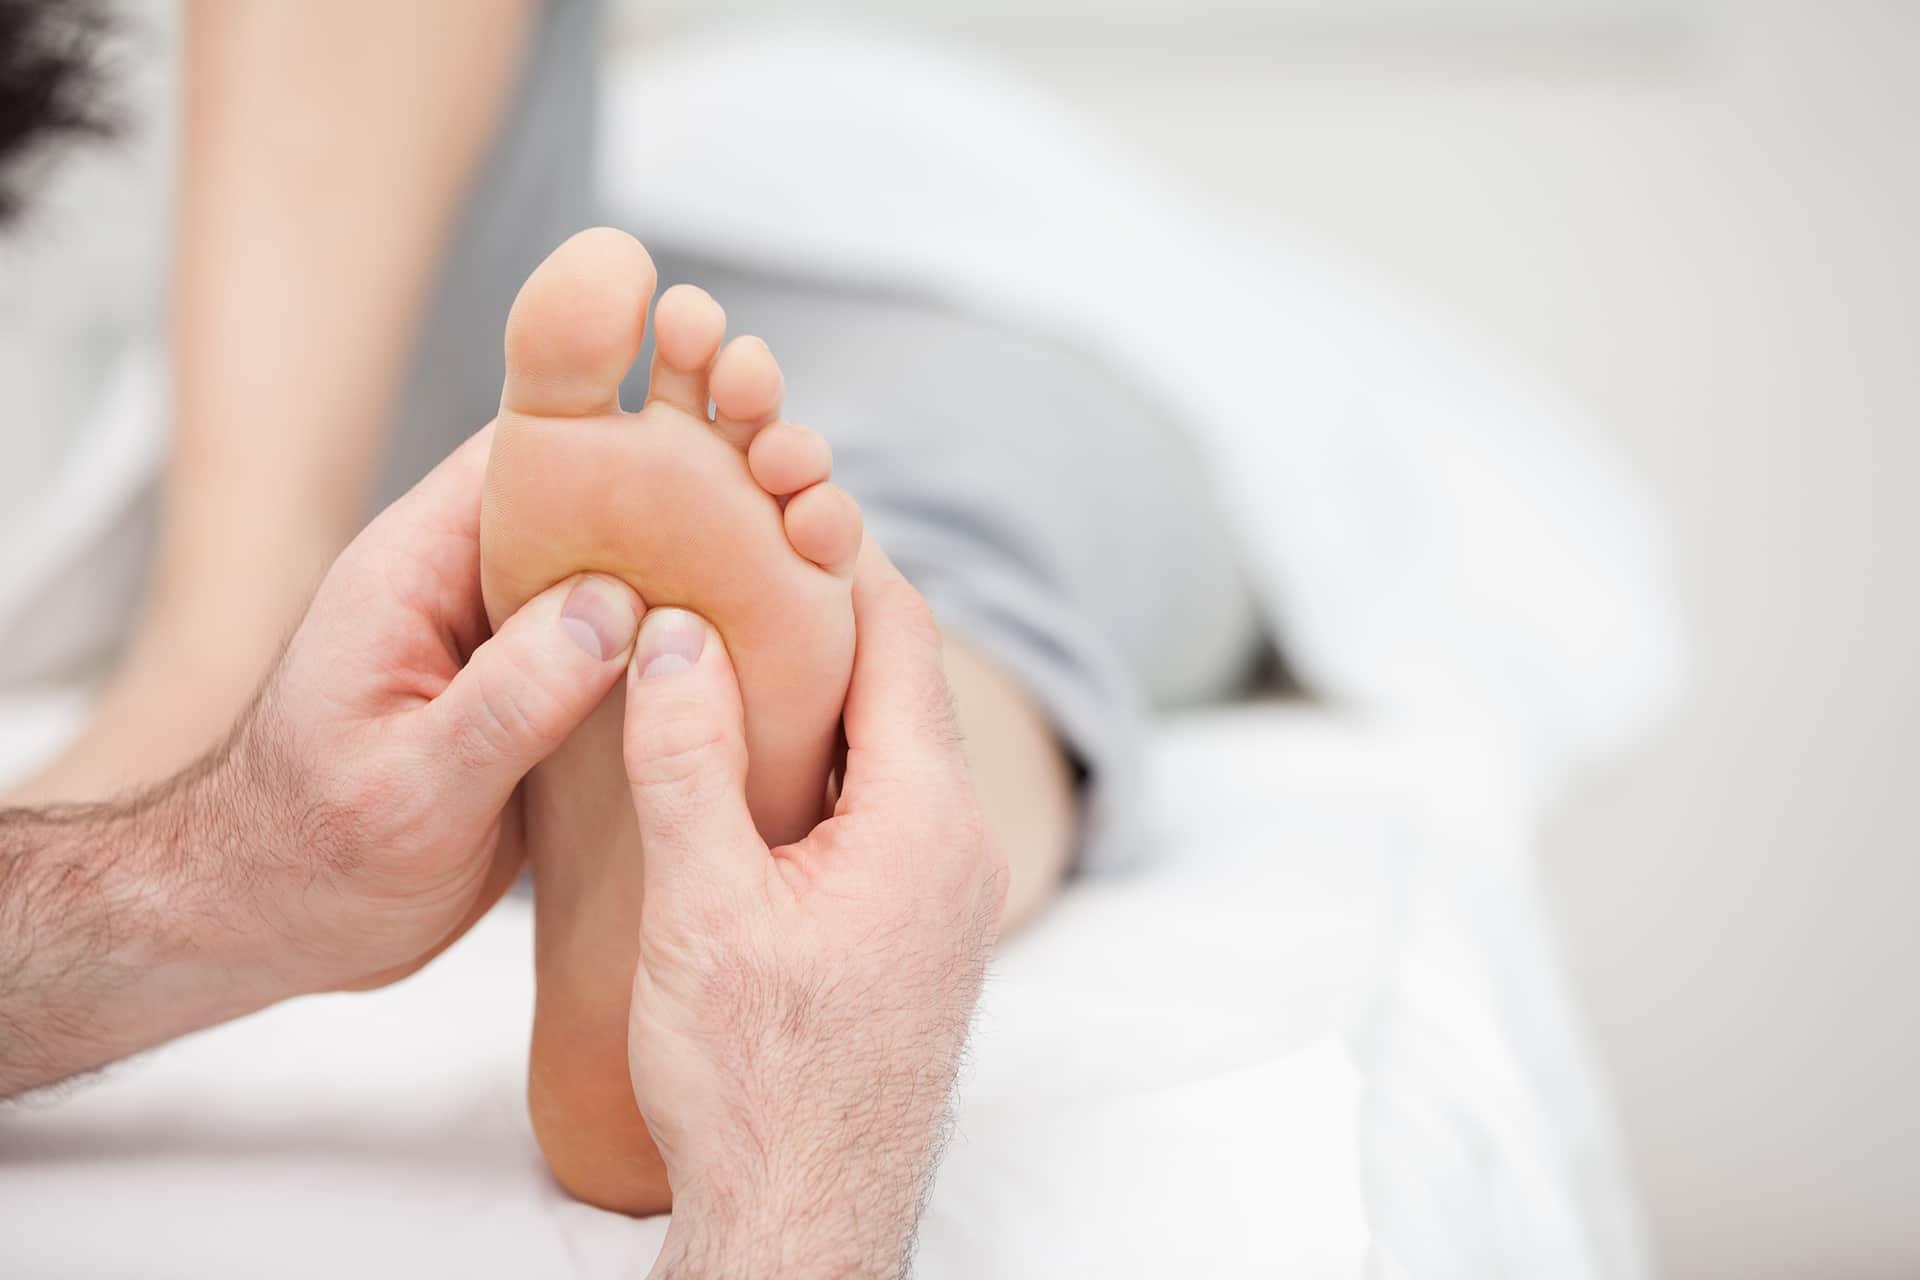 Podiatry services being performed at PRO Medical Podiatry